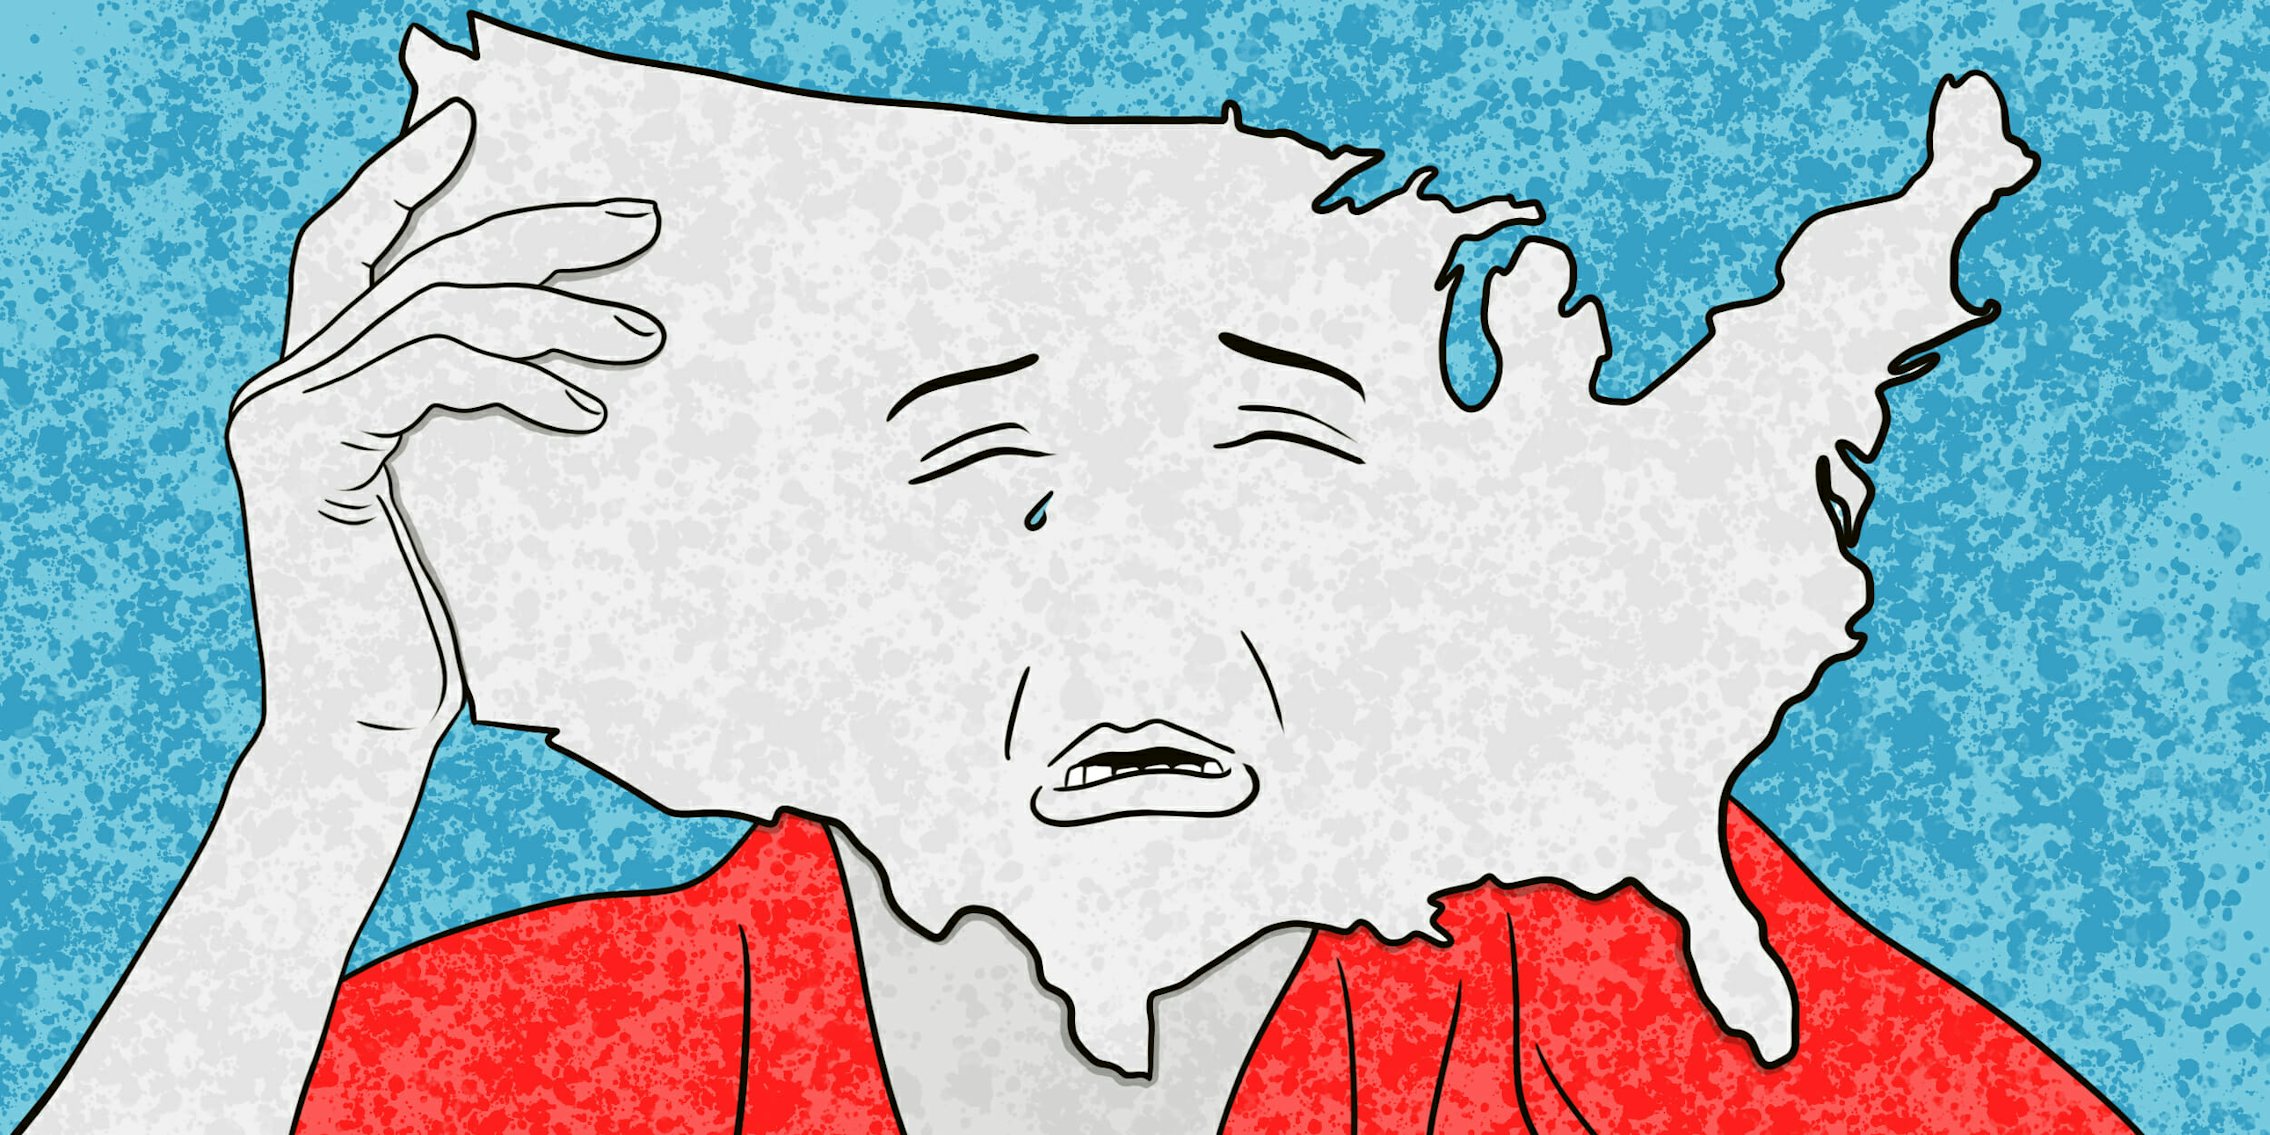 Shape of the United States as a head with a sad face